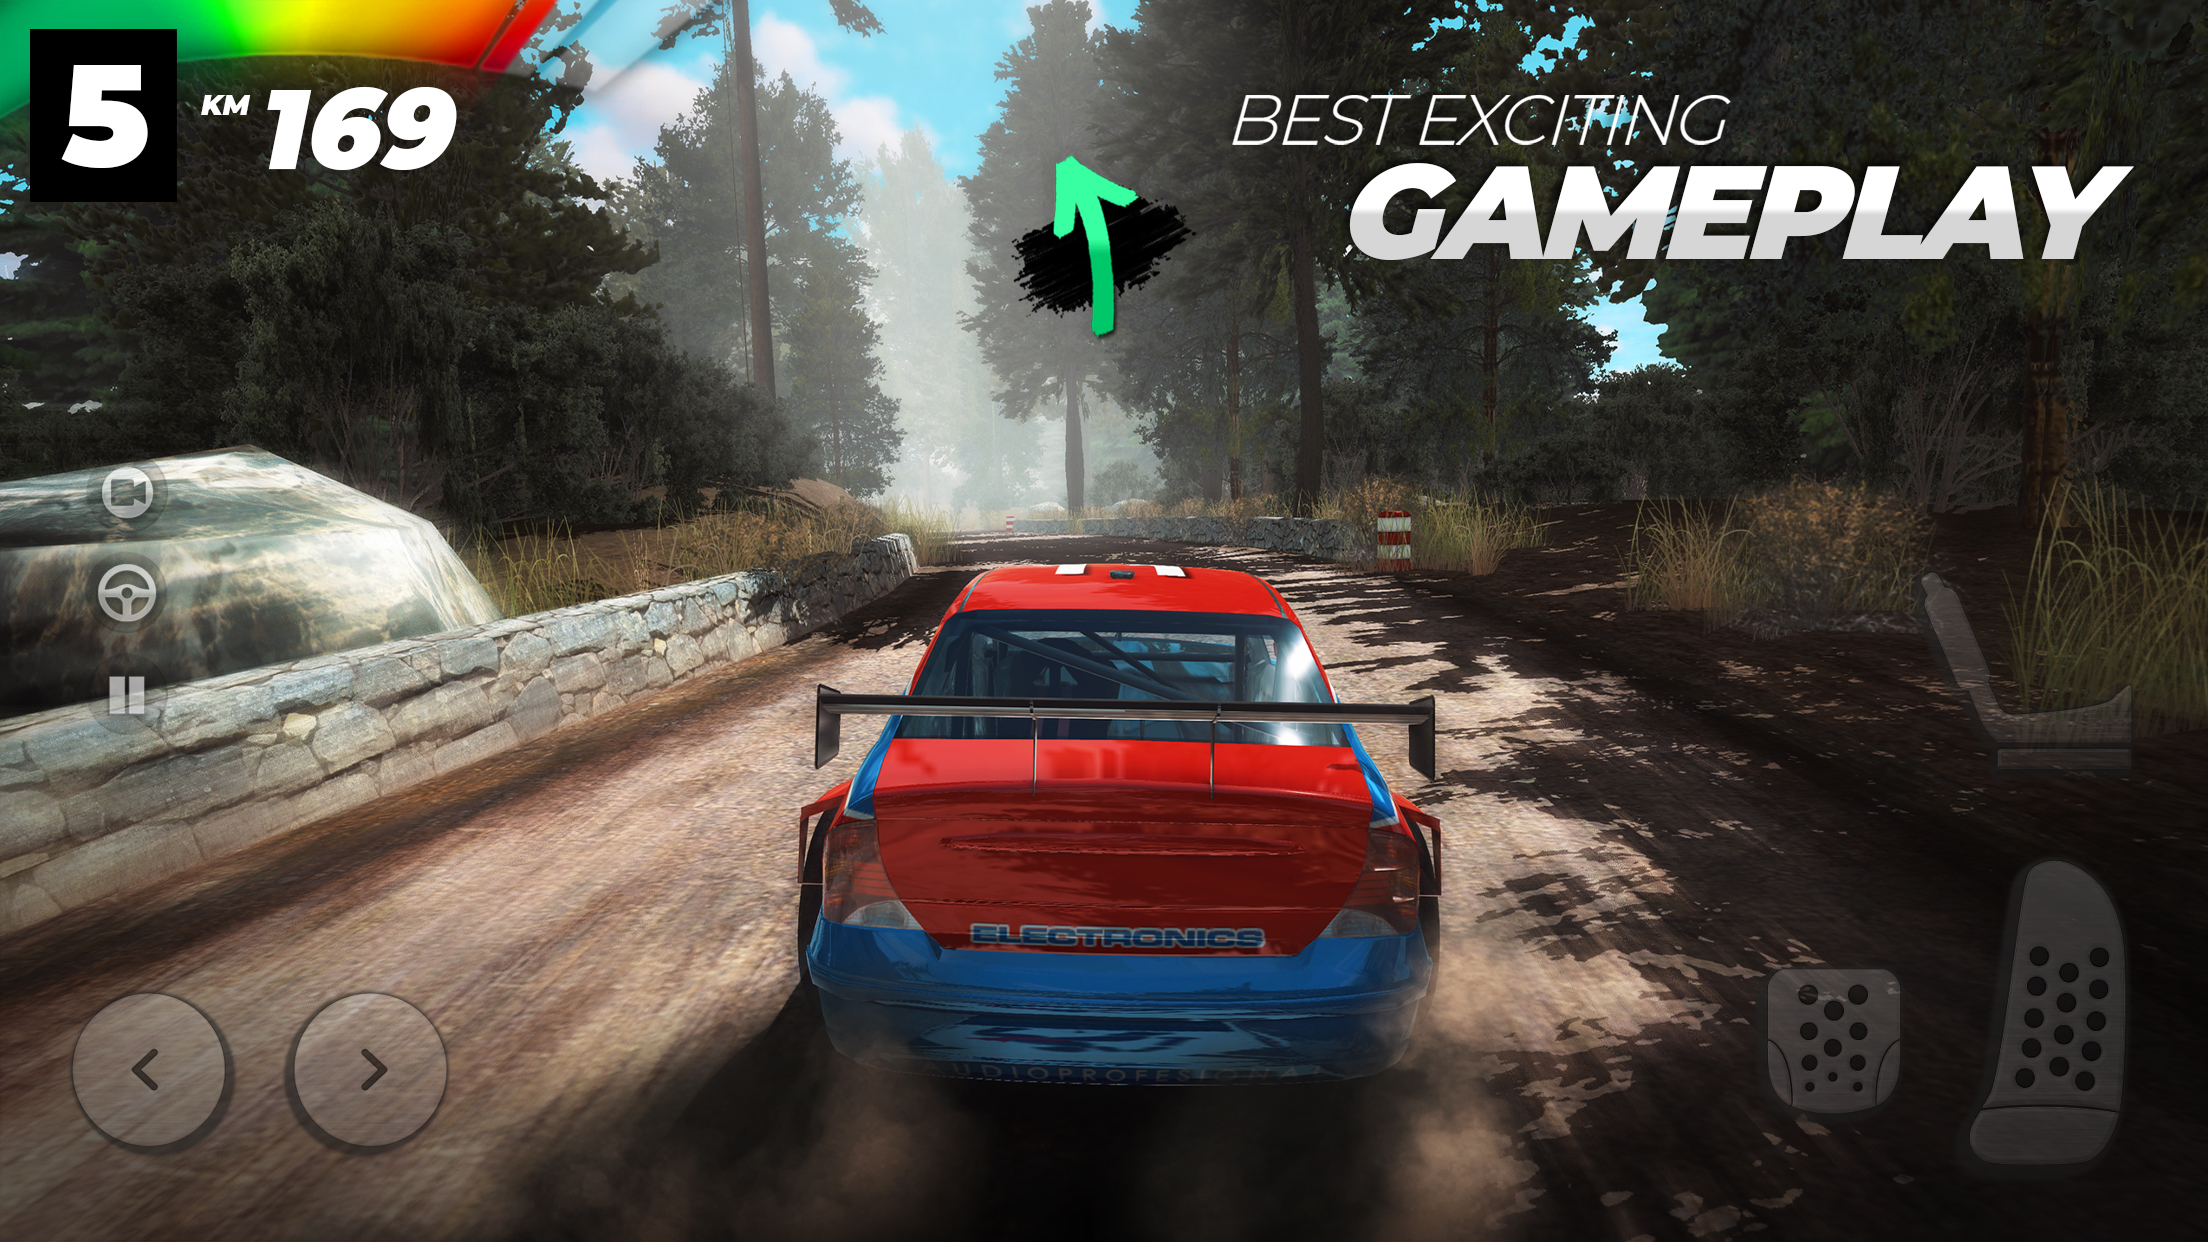 13 Best Car Drifting Games For Android/iOS With Best Physics & Graphics   Top Drifting Mobile Games! - CarX Drift Racing 2 - CarX Rally - - TapTap